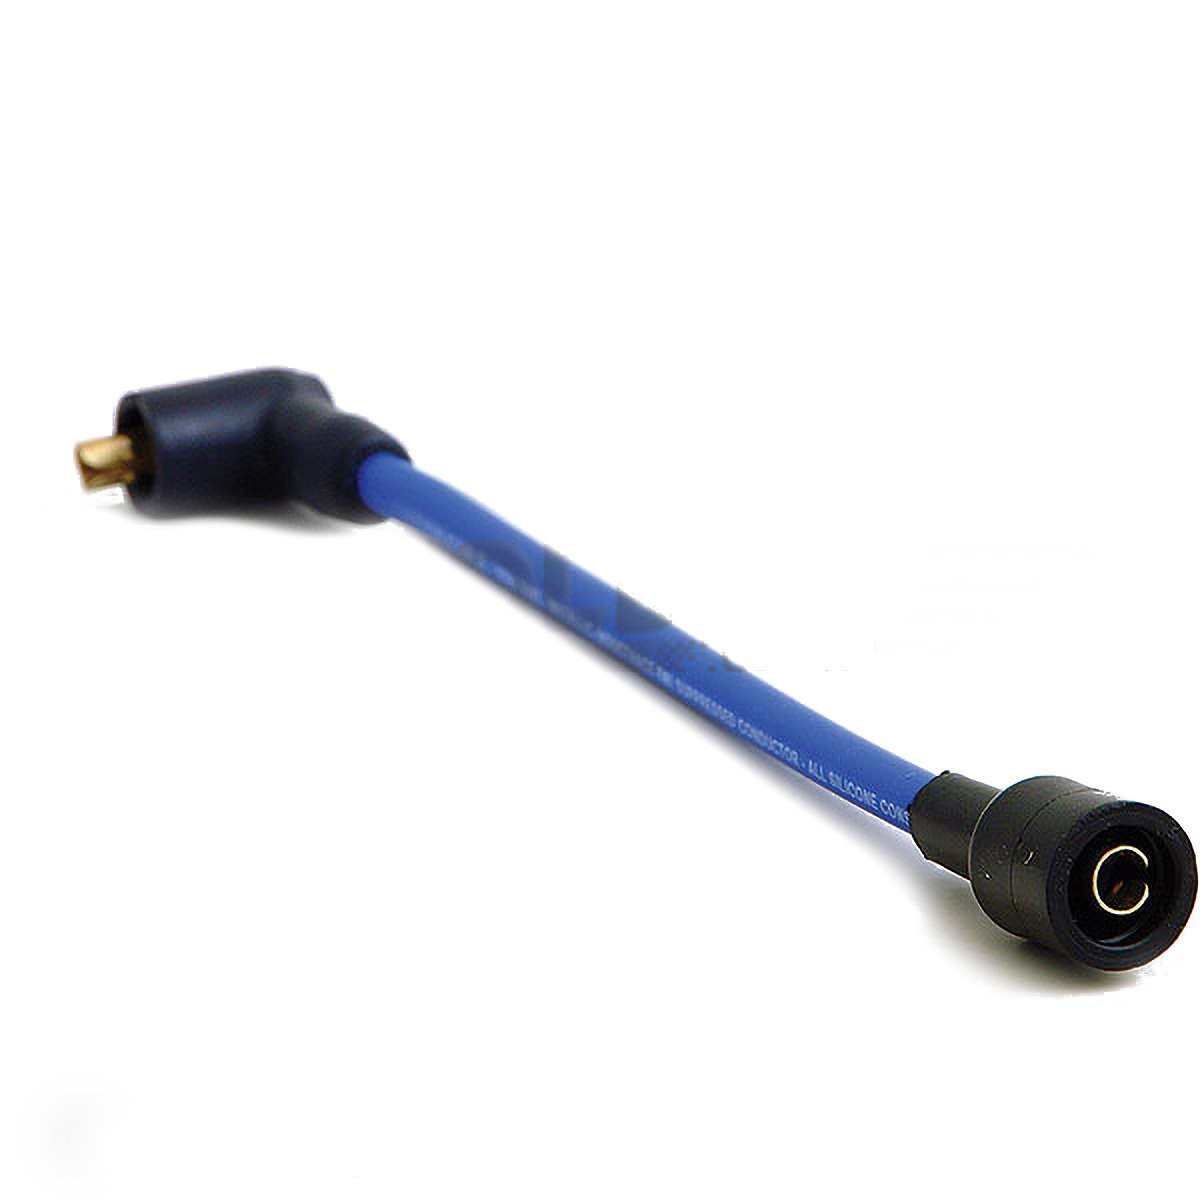 Individual Lead-Operates Between Lumenition Universal Coil Lead 40-220 Degrees 